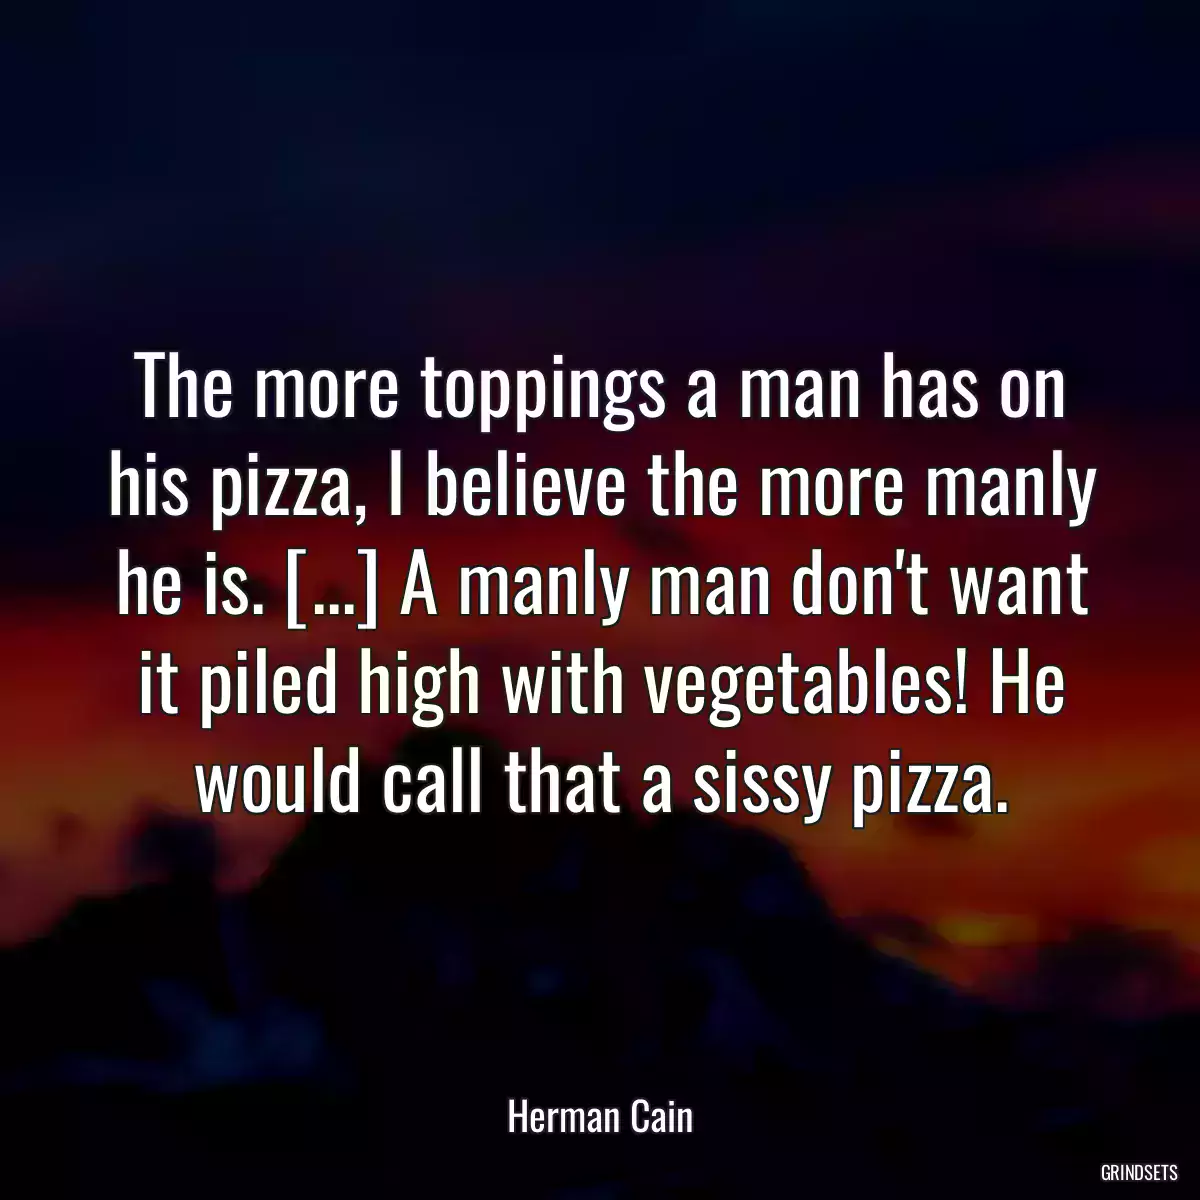 The more toppings a man has on his pizza, I believe the more manly he is. [...] A manly man don\'t want it piled high with vegetables! He would call that a sissy pizza.